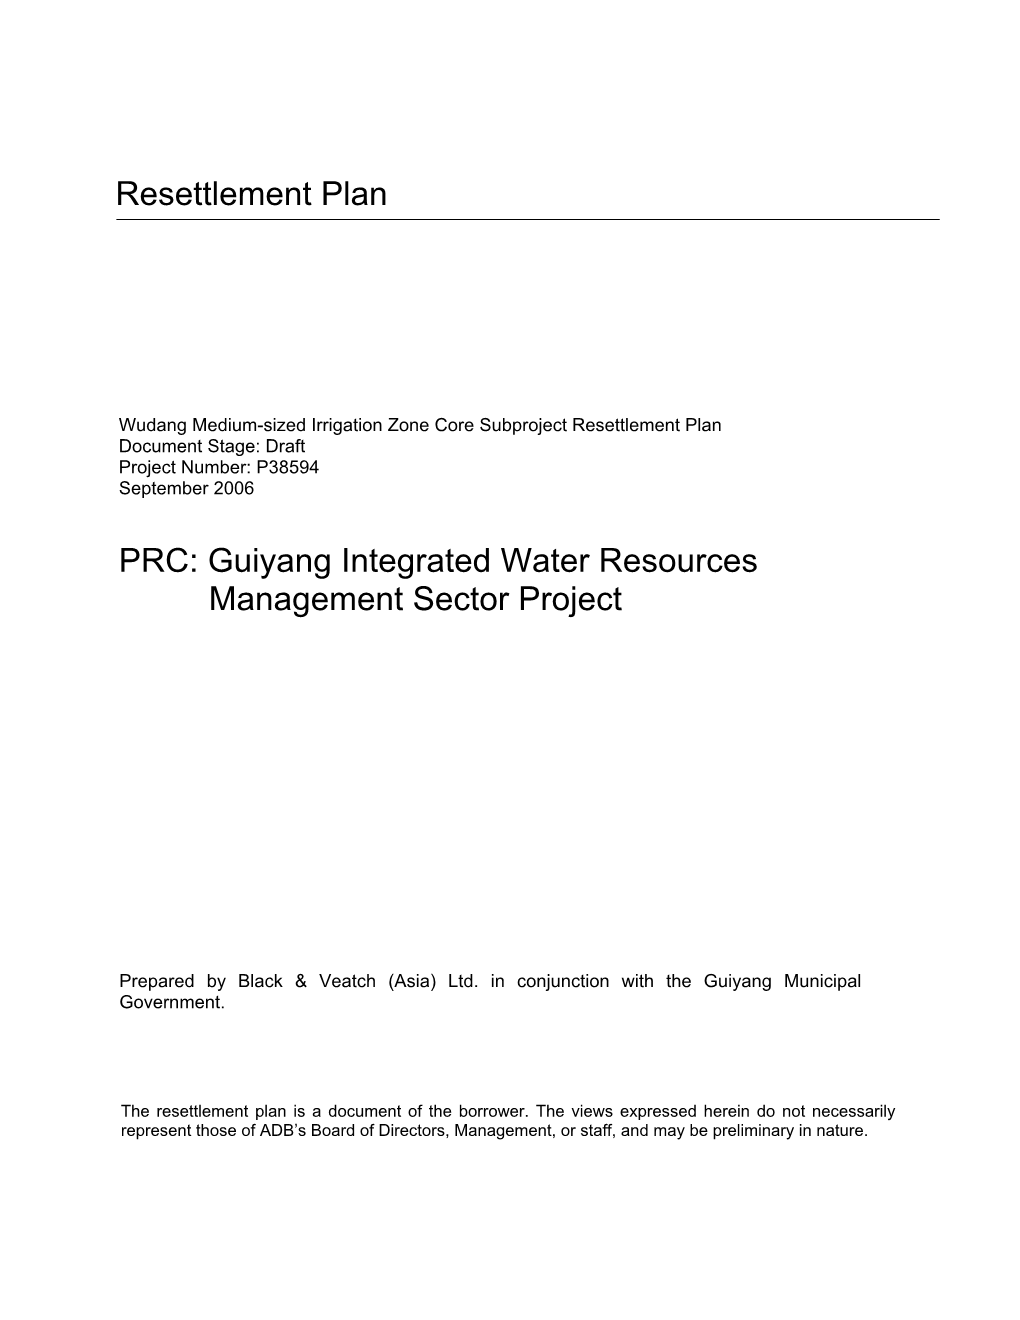 Guiyang Integrated Water Resources Management Sector Project